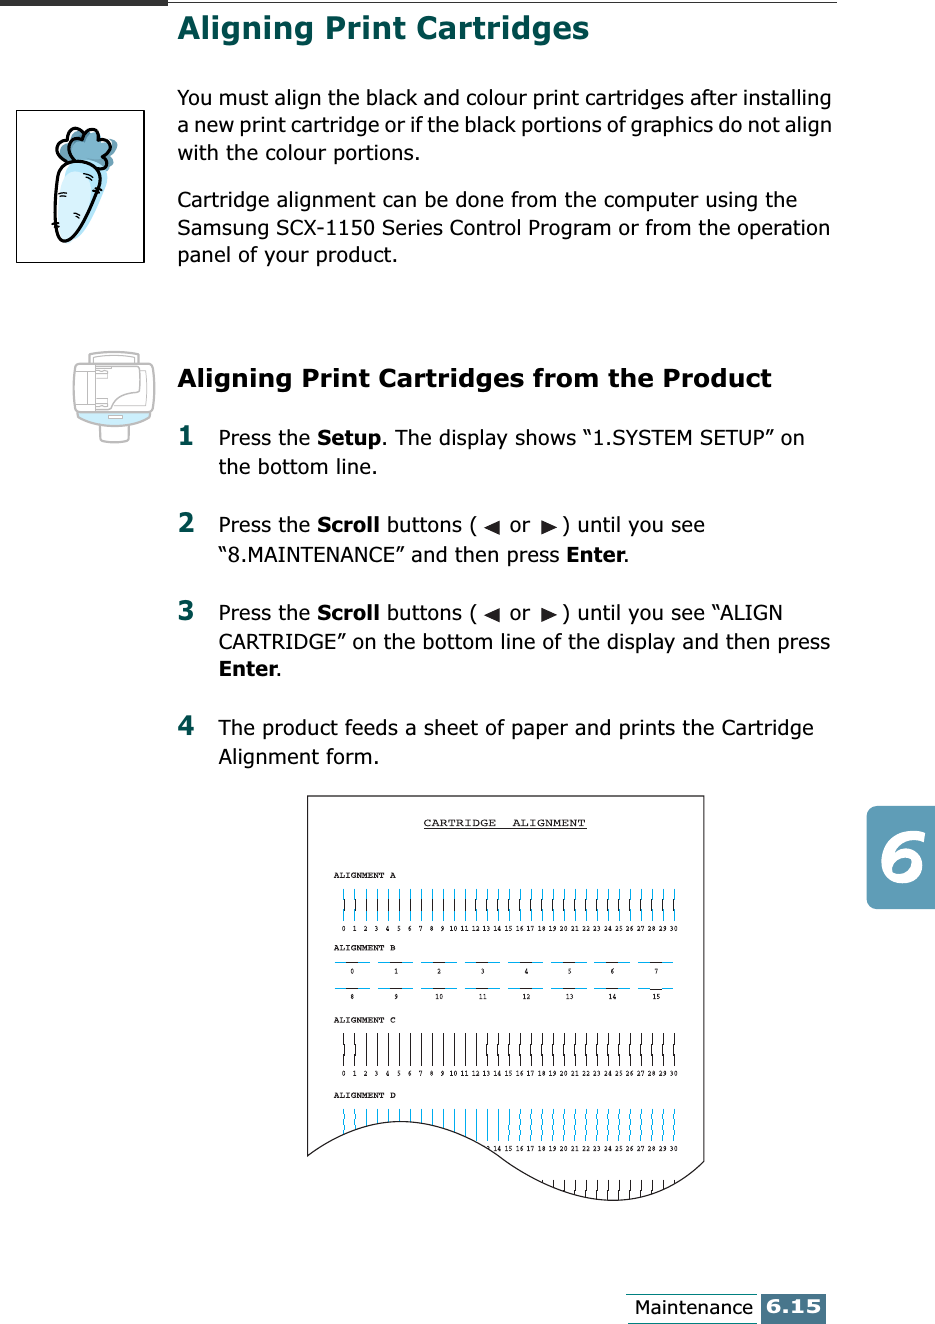 6.15MaintenanceAligning Print Cartridges You must align the black and colour print cartridges after installing a new print cartridge or if the black portions of graphics do not align with the colour portions.Cartridge alignment can be done from the computer using the Samsung SCX-1150 Series Control Program or from the operation panel of your product.Aligning Print Cartridges from the Product1Press the Setup. The display shows “1.SYSTEM SETUP” on the bottom line.2Press the Scroll buttons (  or  ) until you see “8.MAINTENANCE” and then press Enter. 3Press the Scroll buttons (  or  ) until you see “ALIGN CARTRIDGE” on the bottom line of the display and then press Enter. 4The product feeds a sheet of paper and prints the Cartridge Alignment form. 